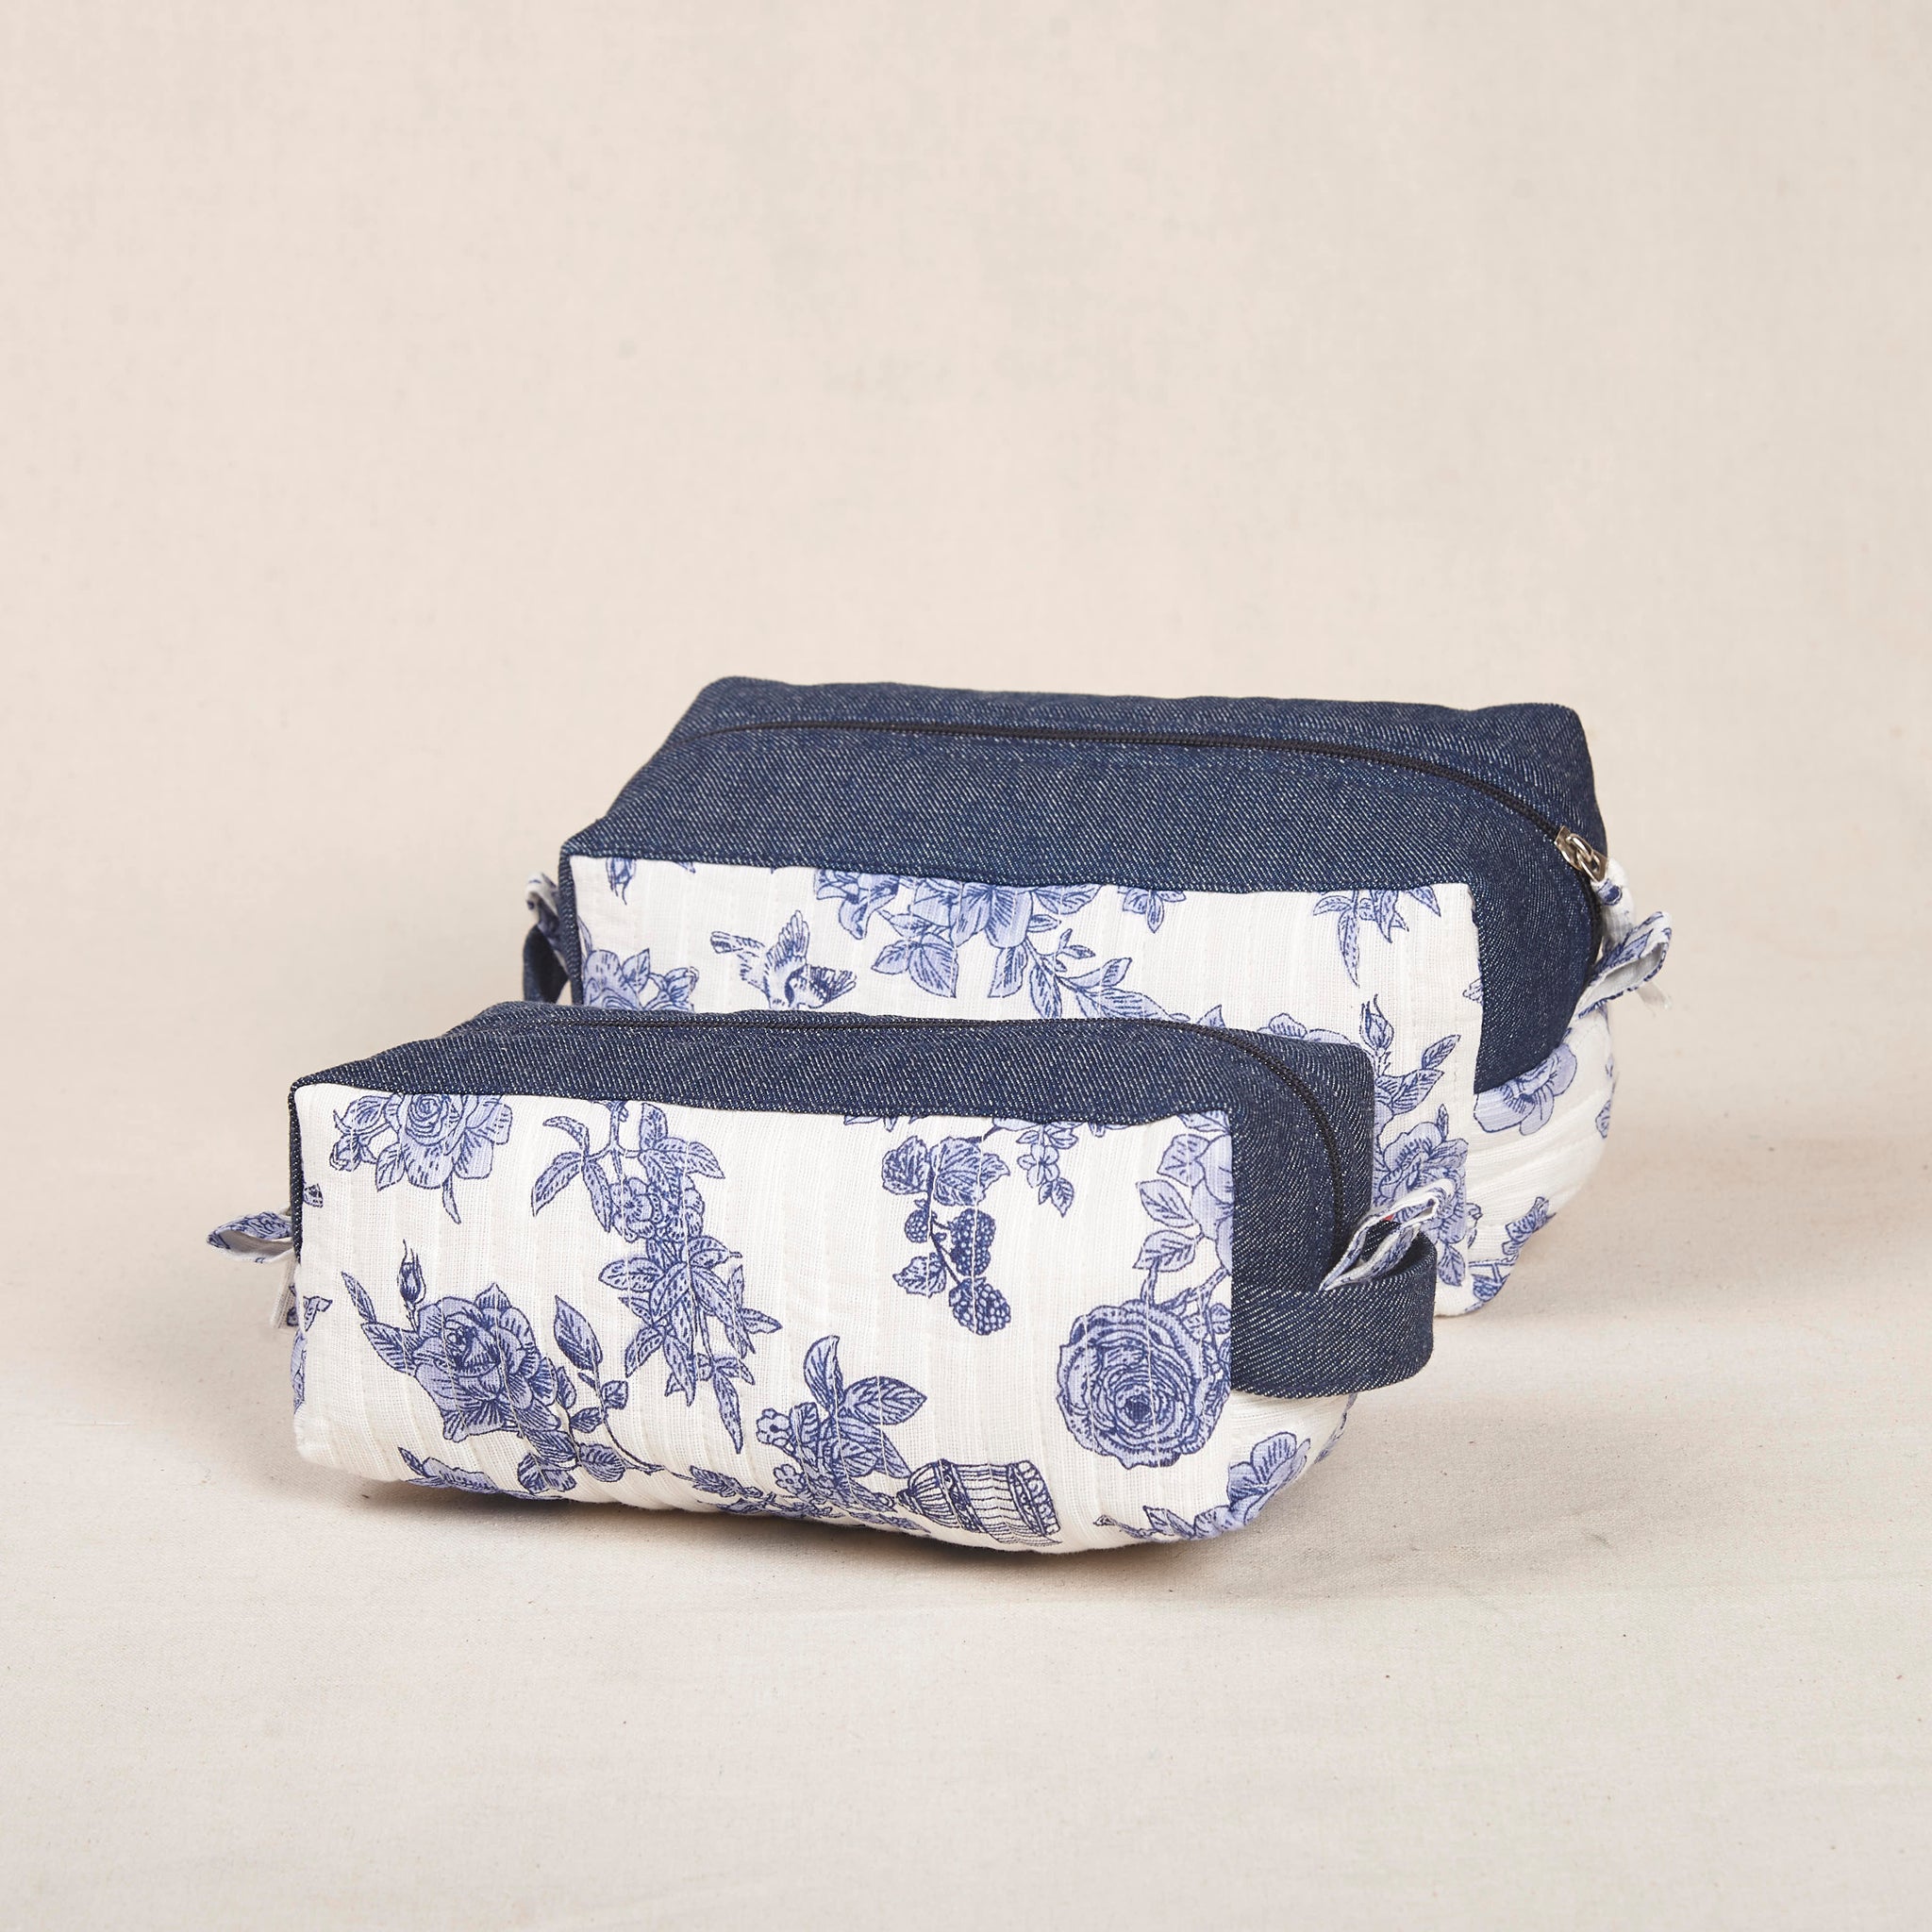 Poonam Pouch - White with Blue Flowers